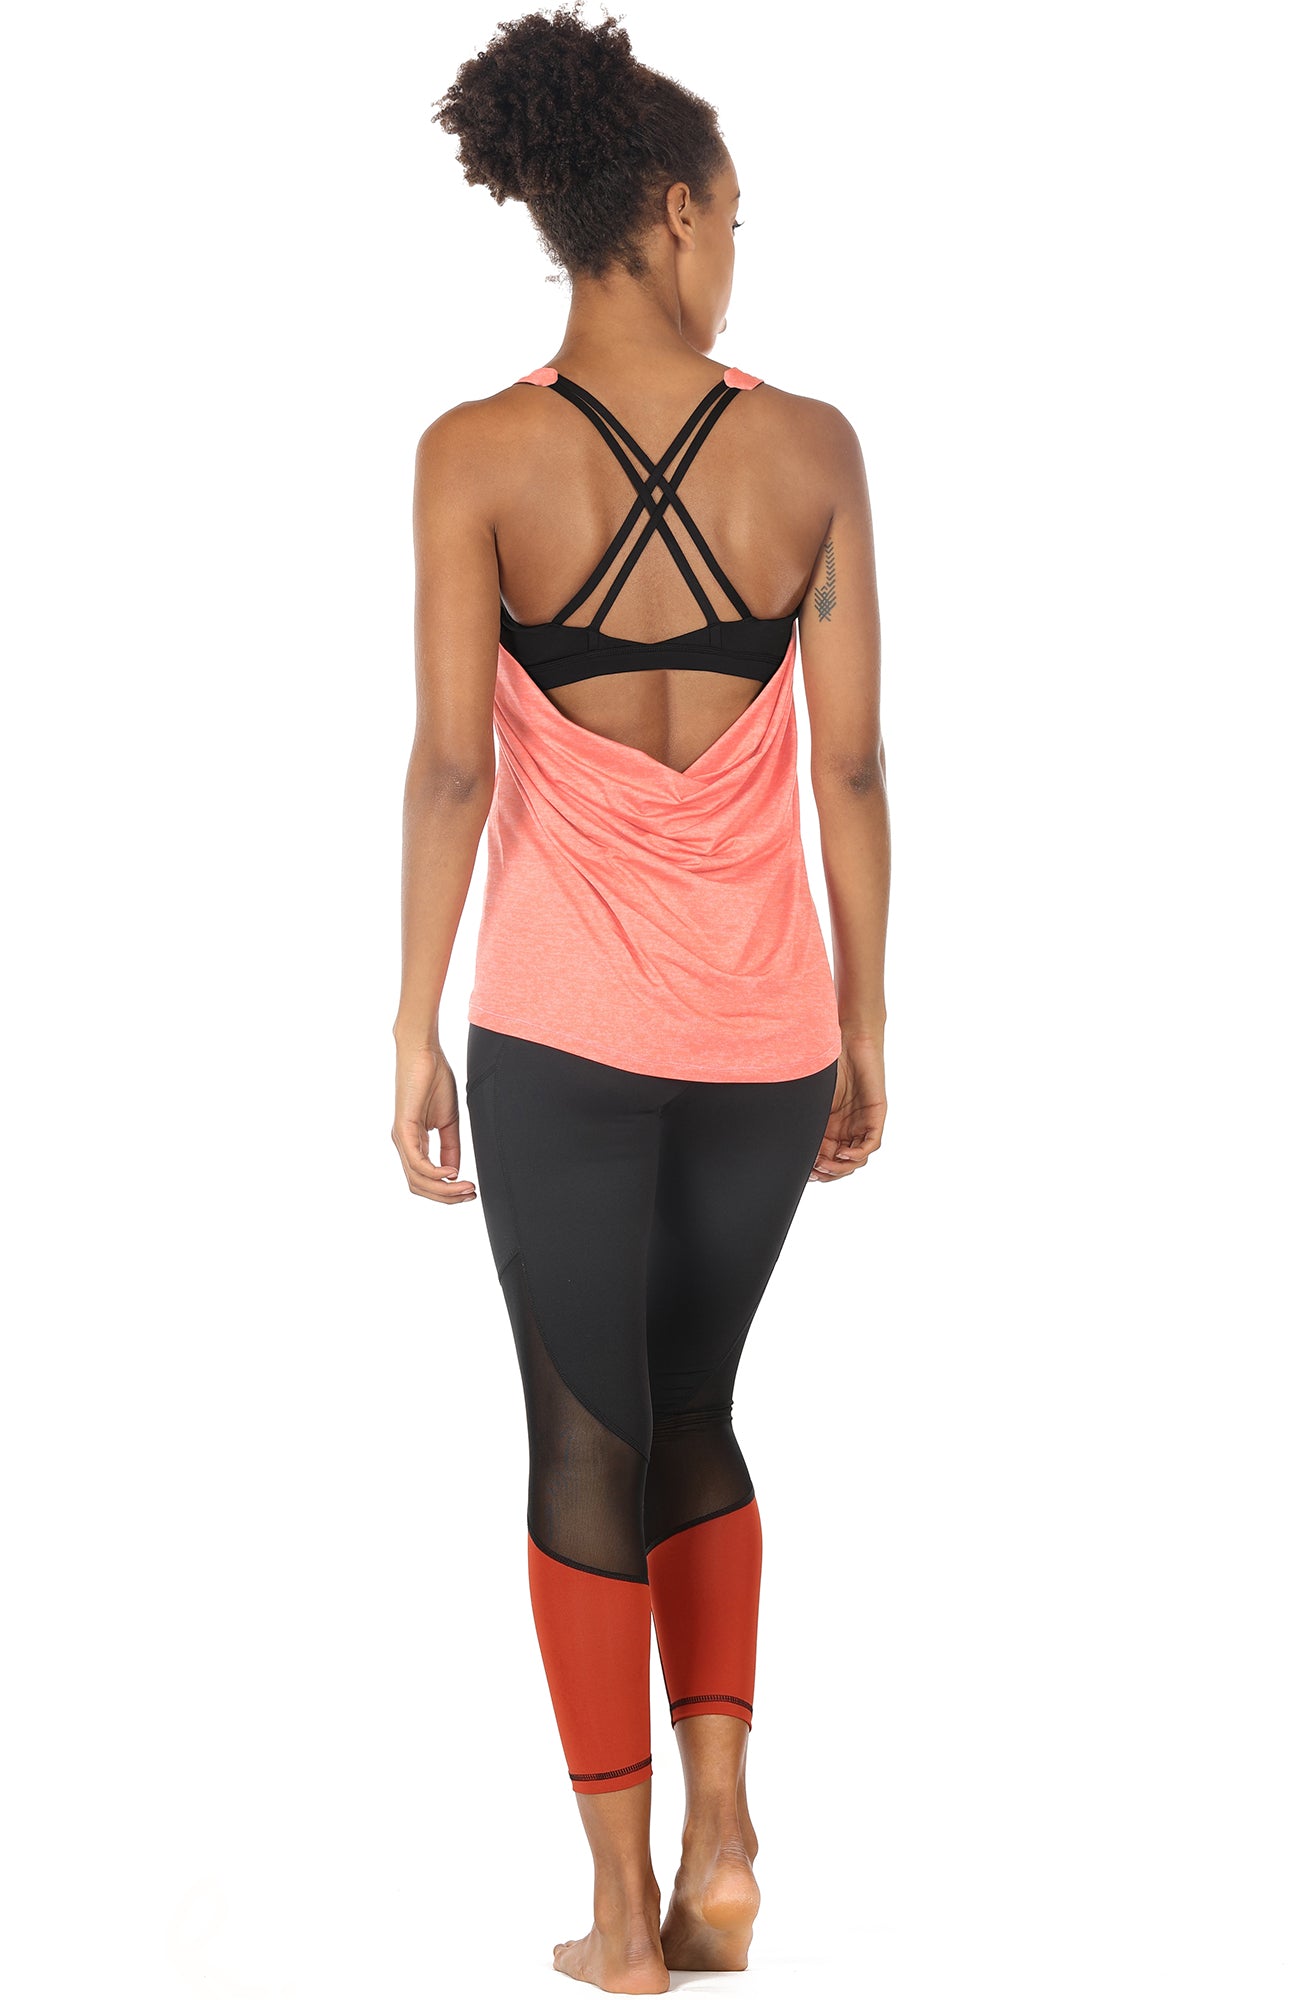 icyzone Workout Tank Tops with Built in Bra - Women's Strappy